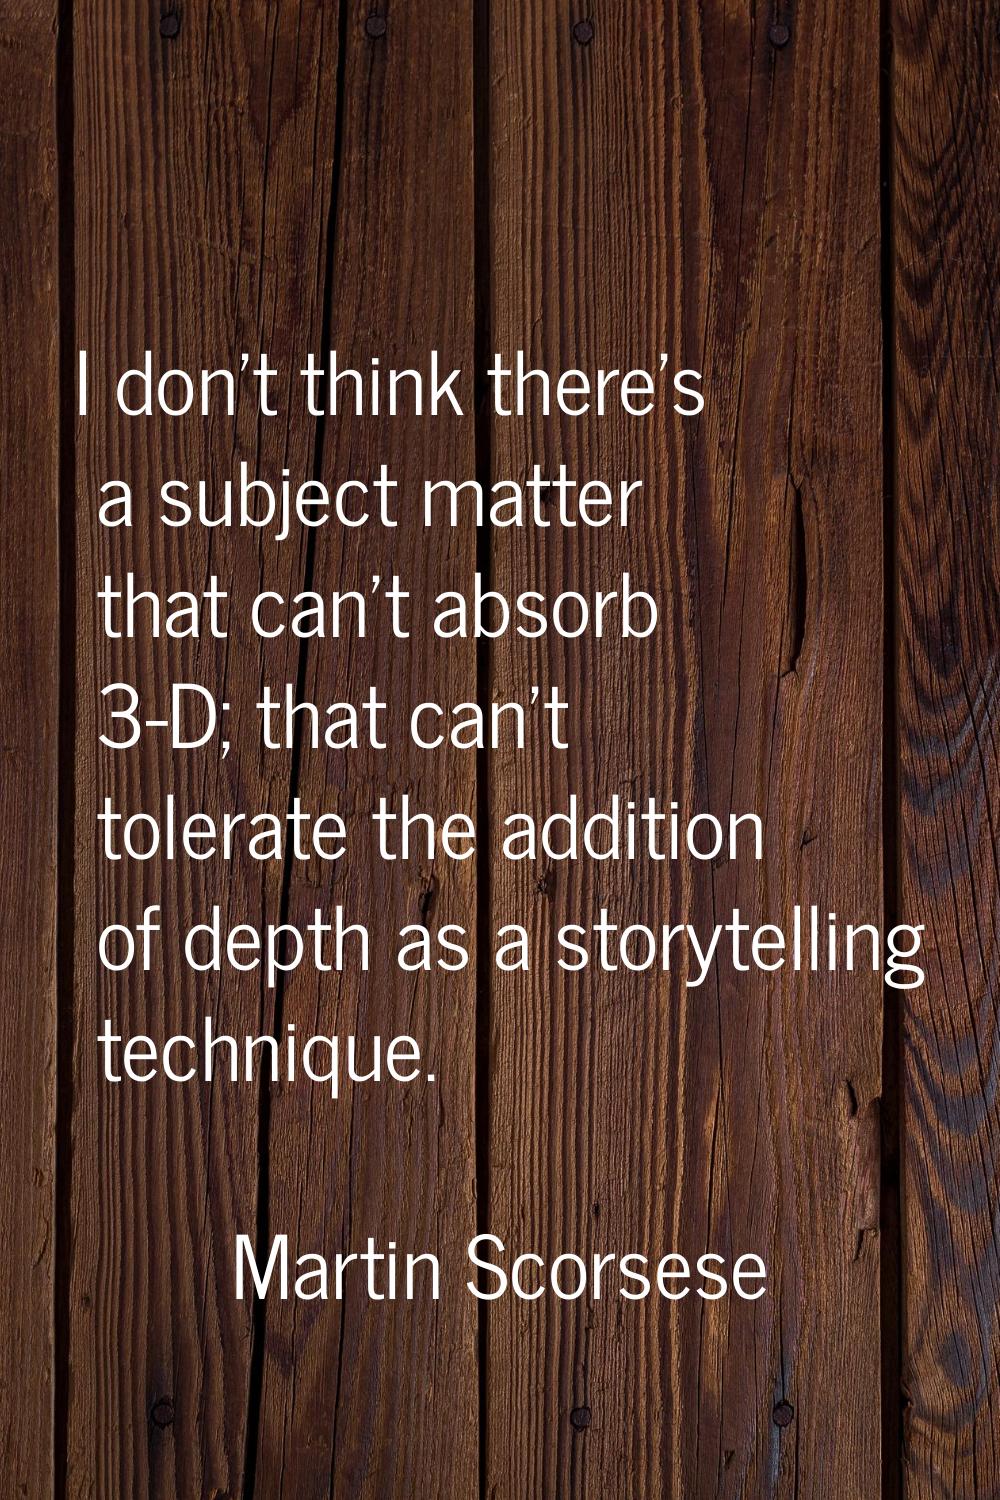 I don't think there's a subject matter that can't absorb 3-D; that can't tolerate the addition of d